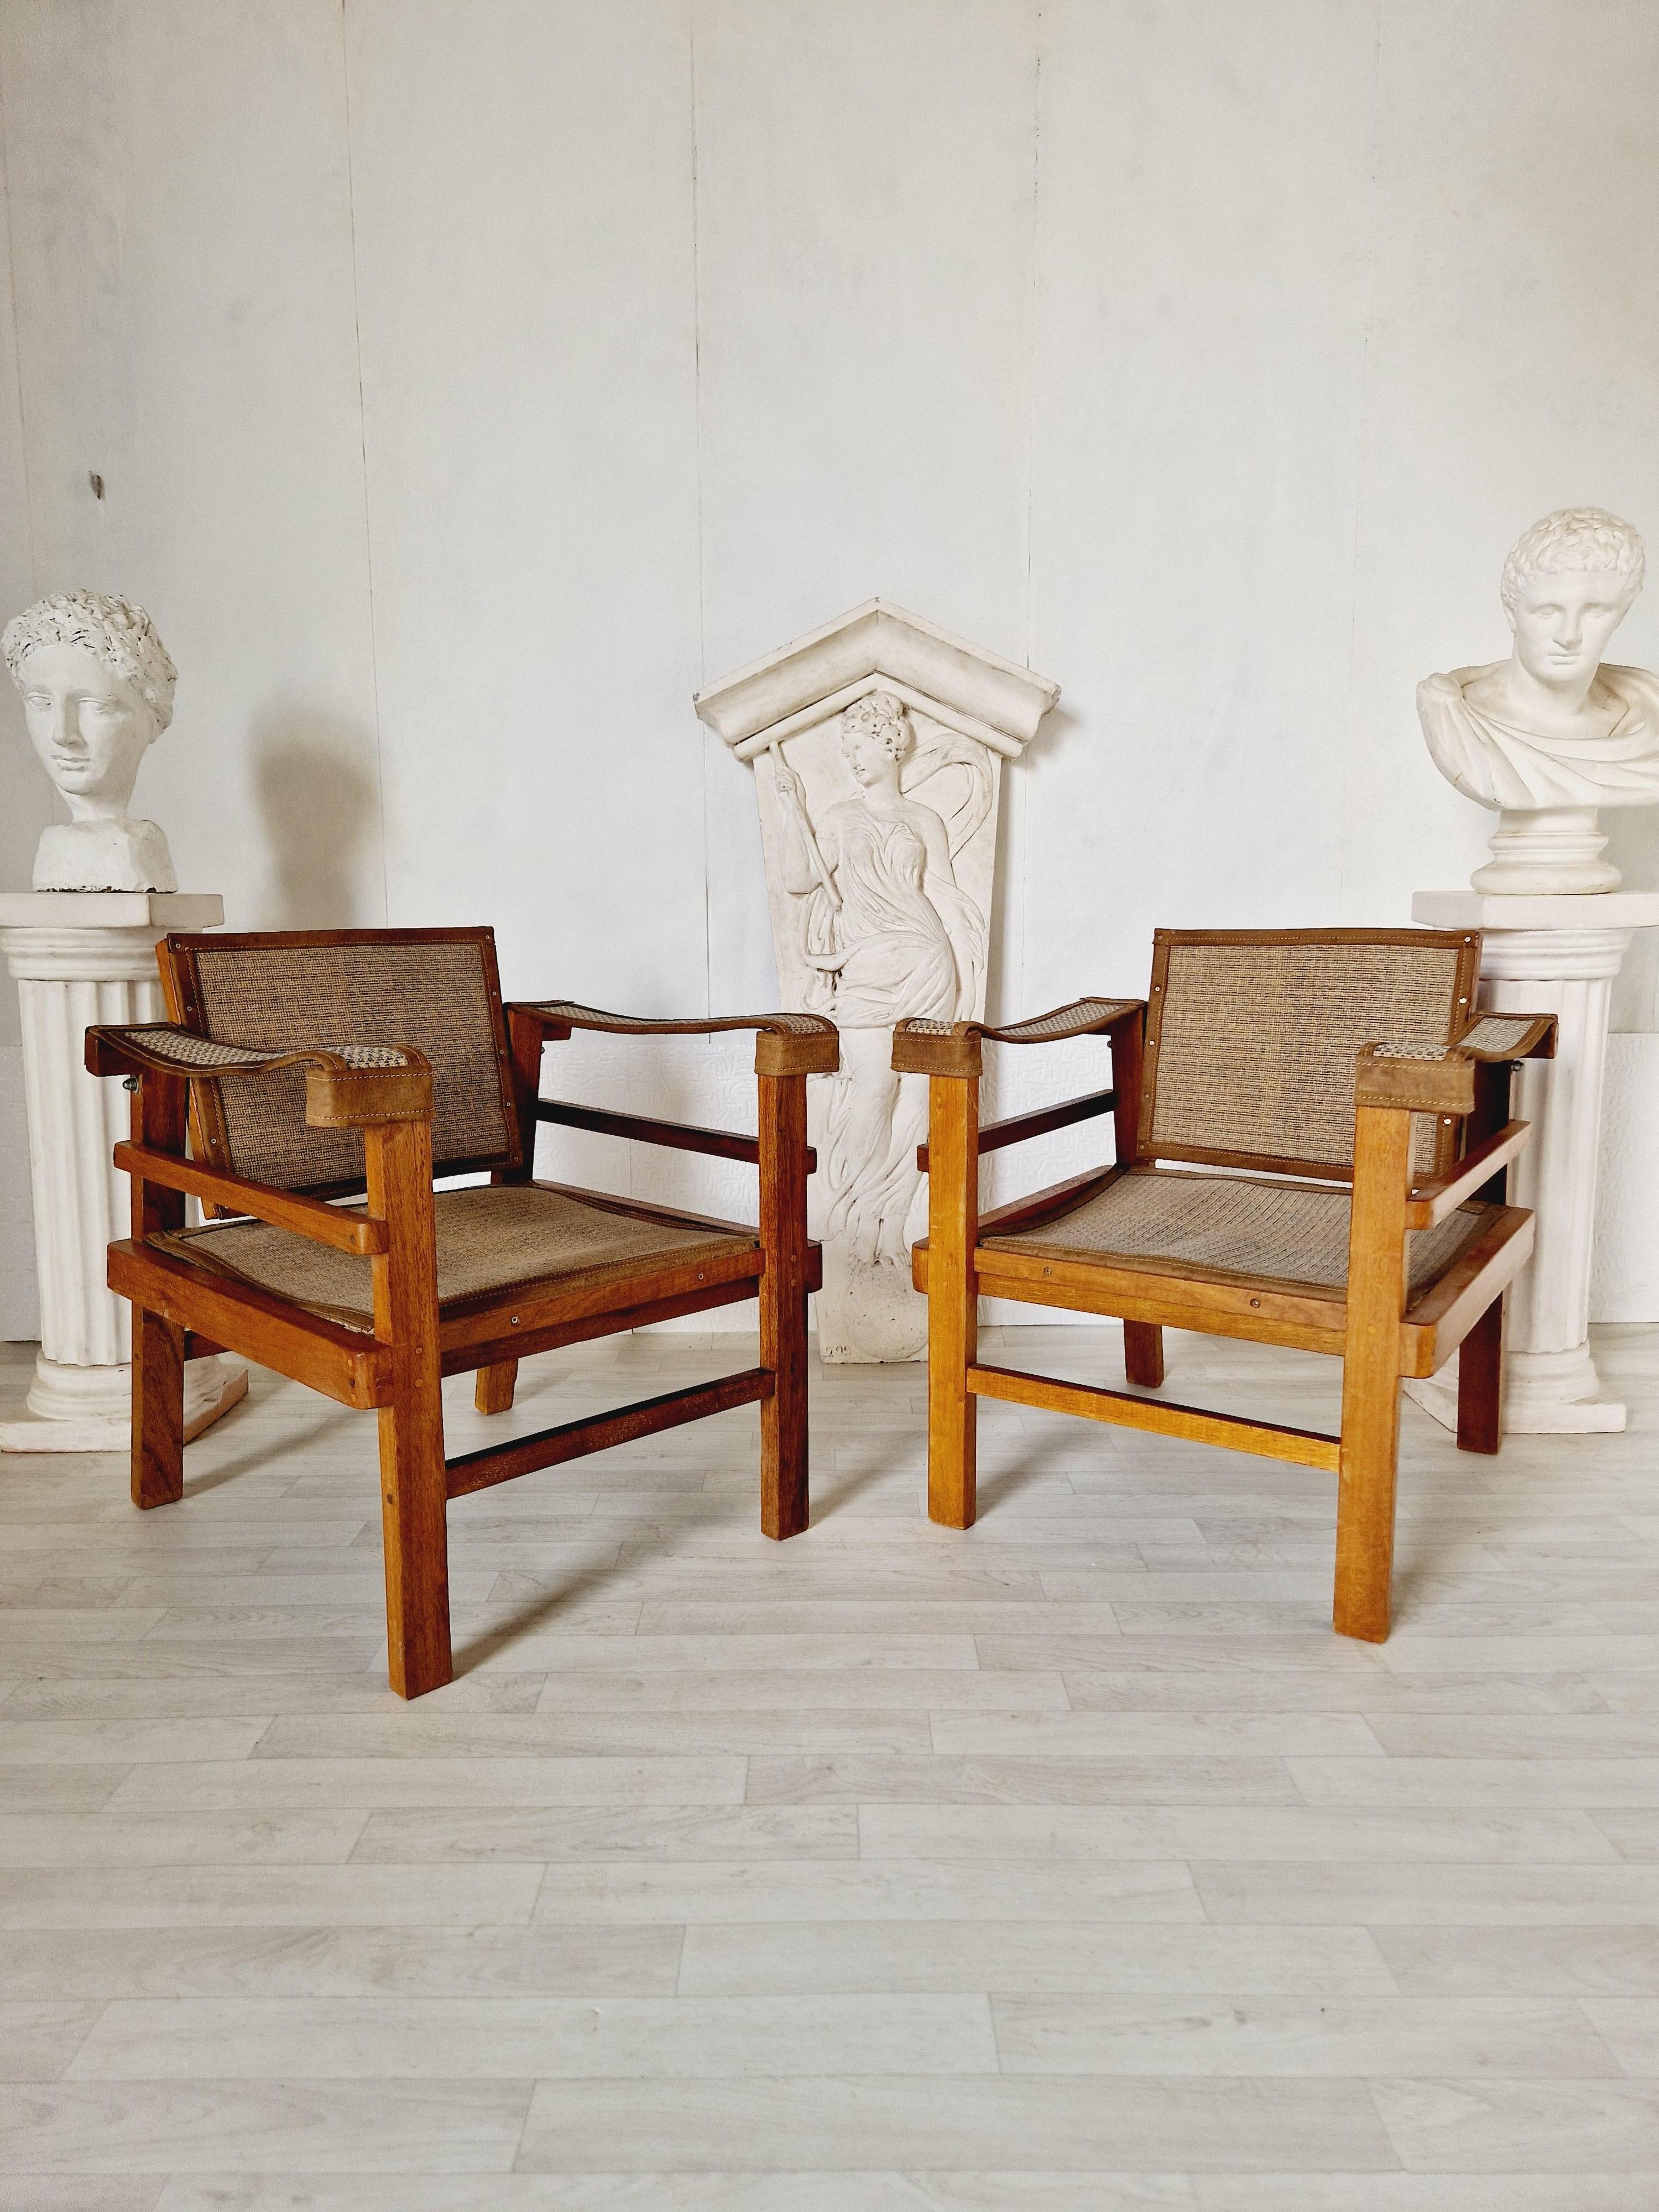 This pair of vintage armchairs is a beautiful addition to any room. With their square shape and adjustable features, they provide a comfortable seating experience. The Vintage chairs are made of high-quality leather and teak, with hessian upholstery